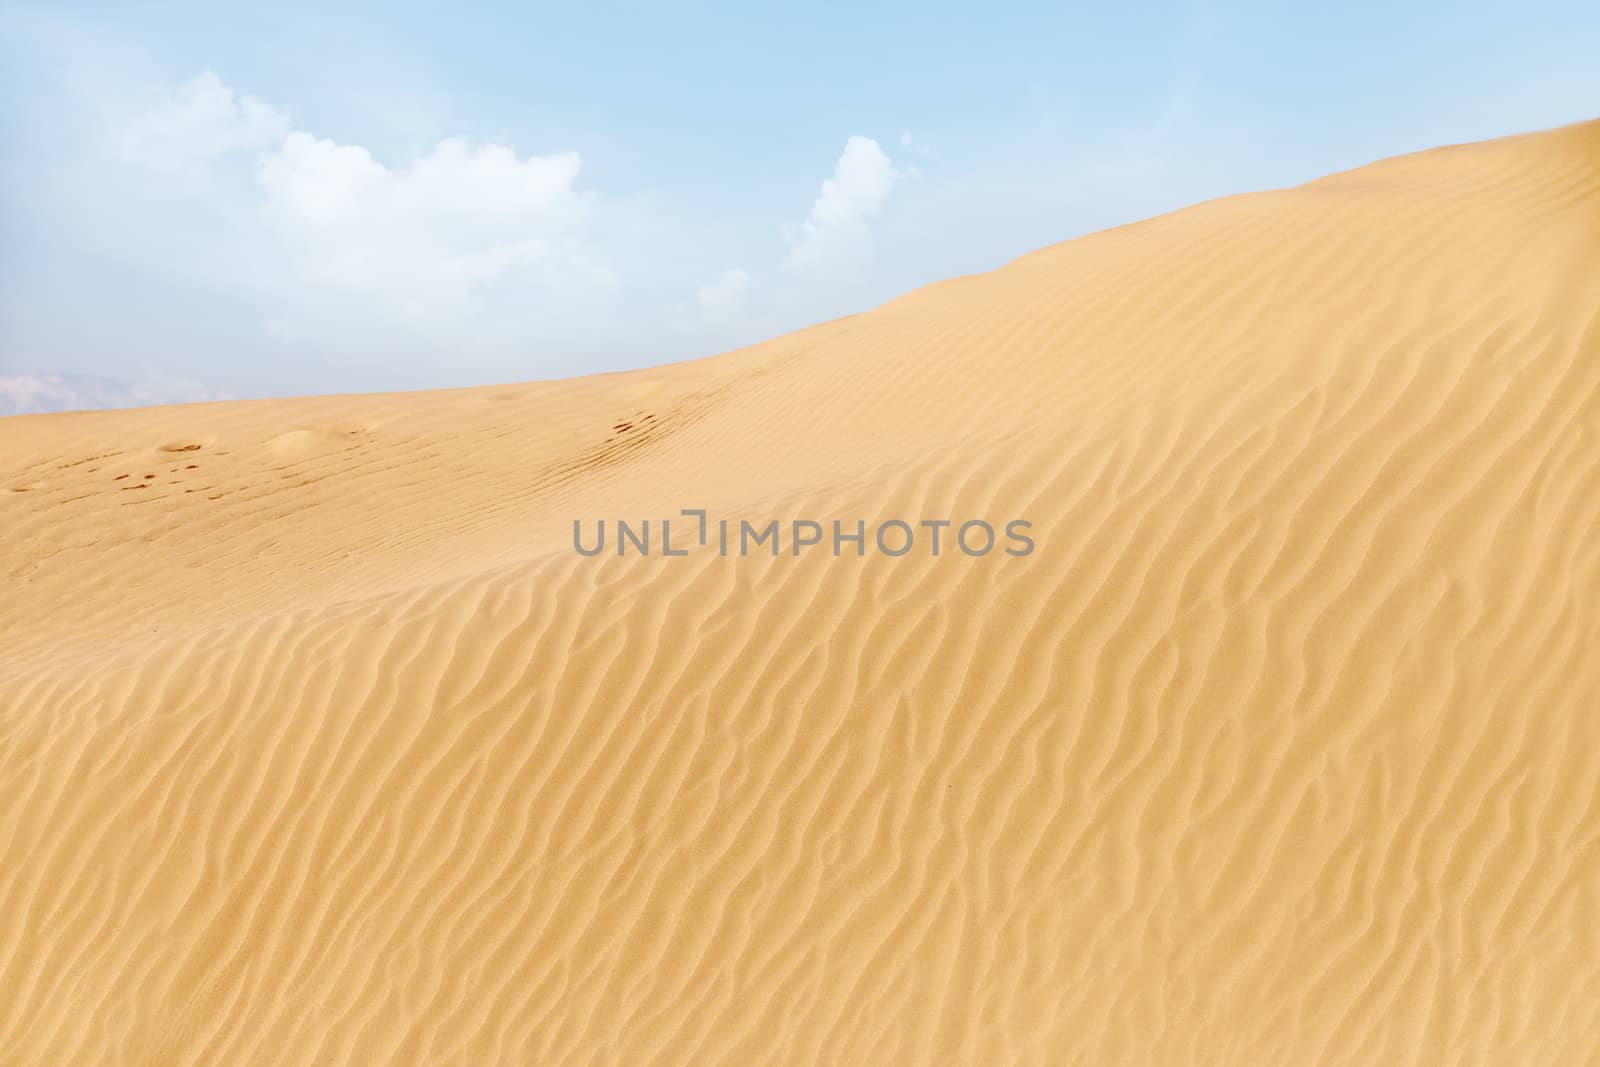 View on the rippled sand dunes in the desert. Natural light and colors